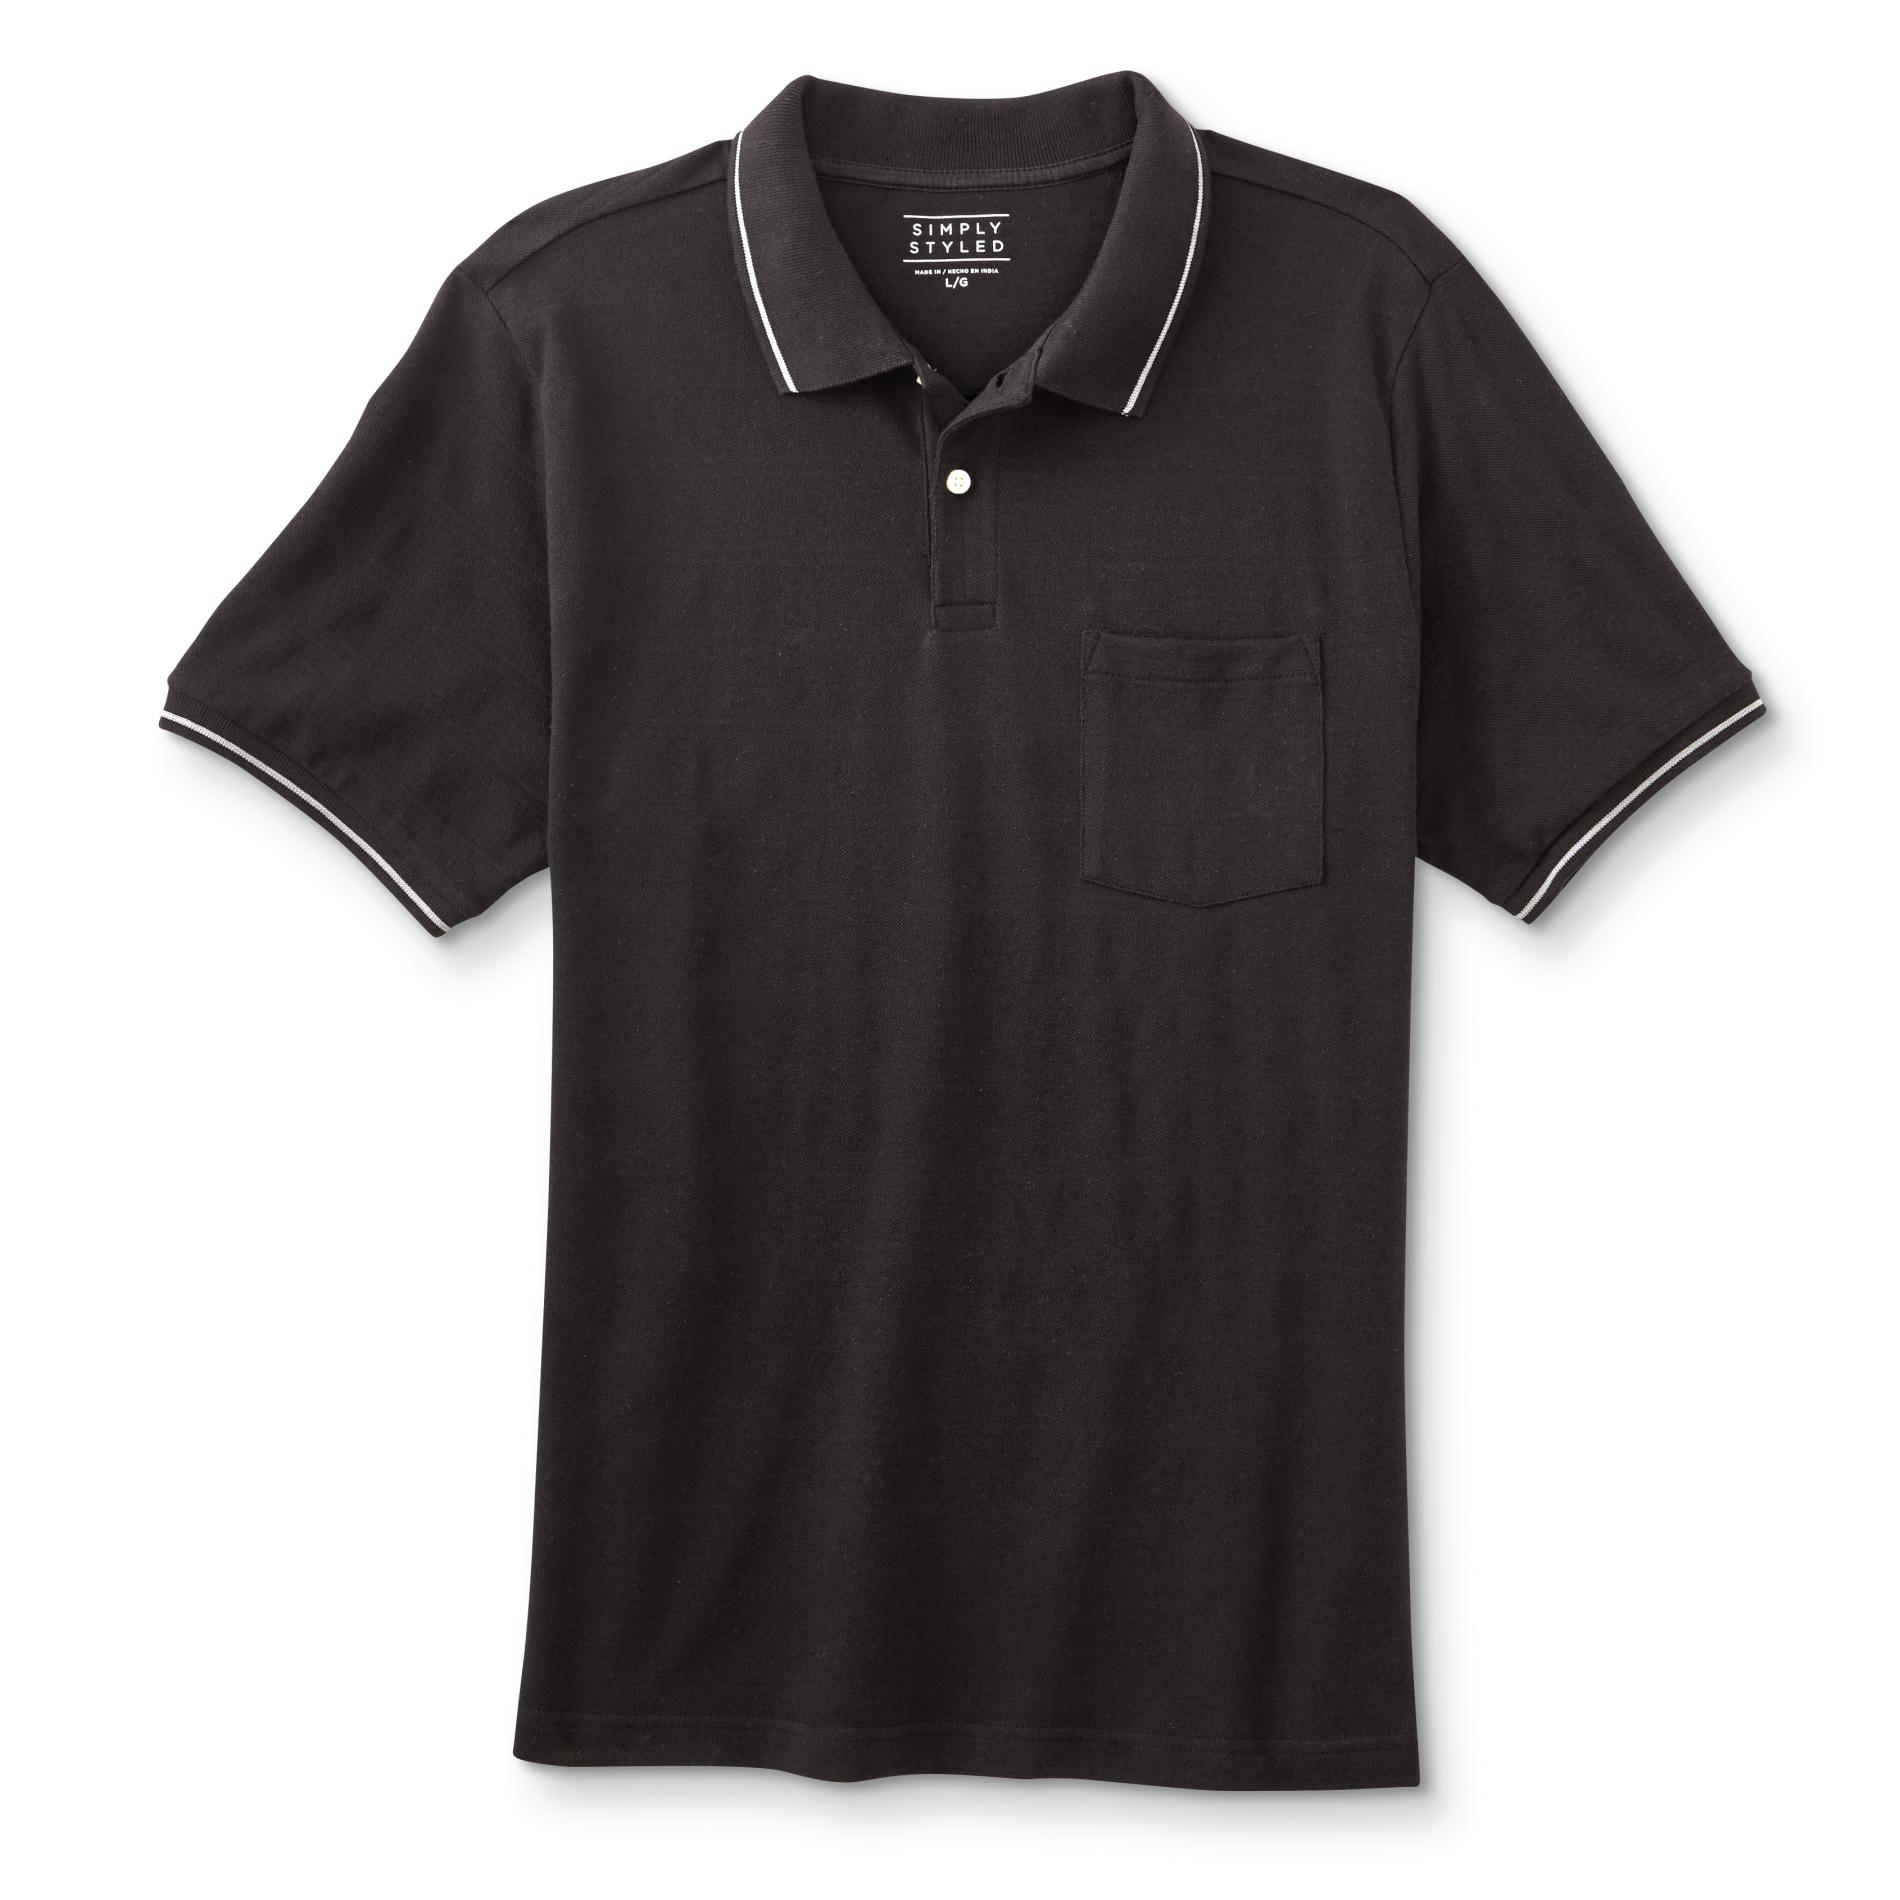 Simply Styled Men's Textured Polo Shirt